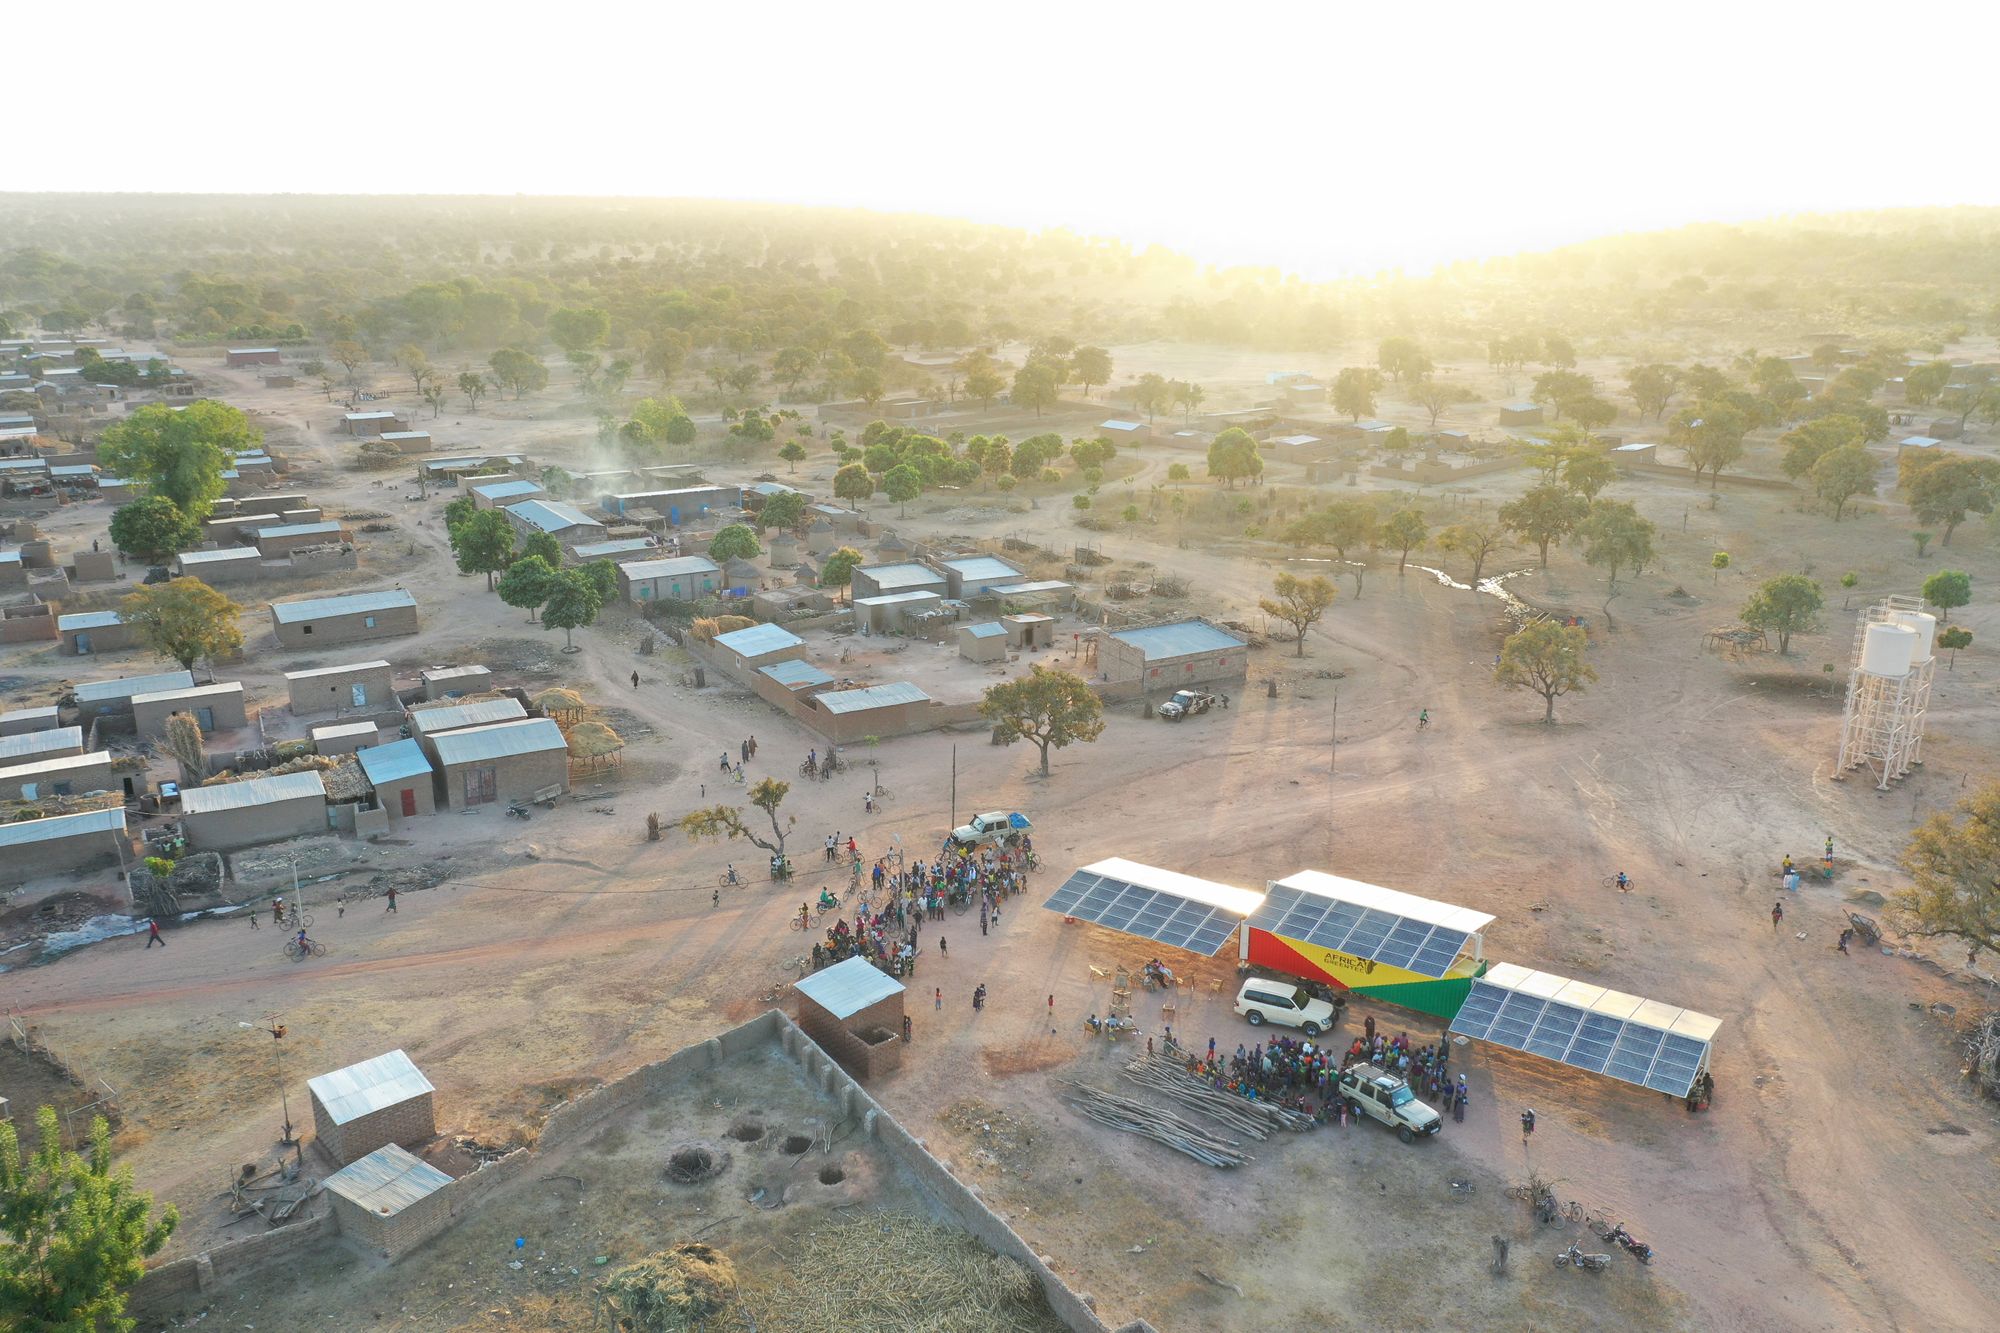 A Solartainer being set up in Mali, Africa. Picture Courtesy: Africa GreenTec